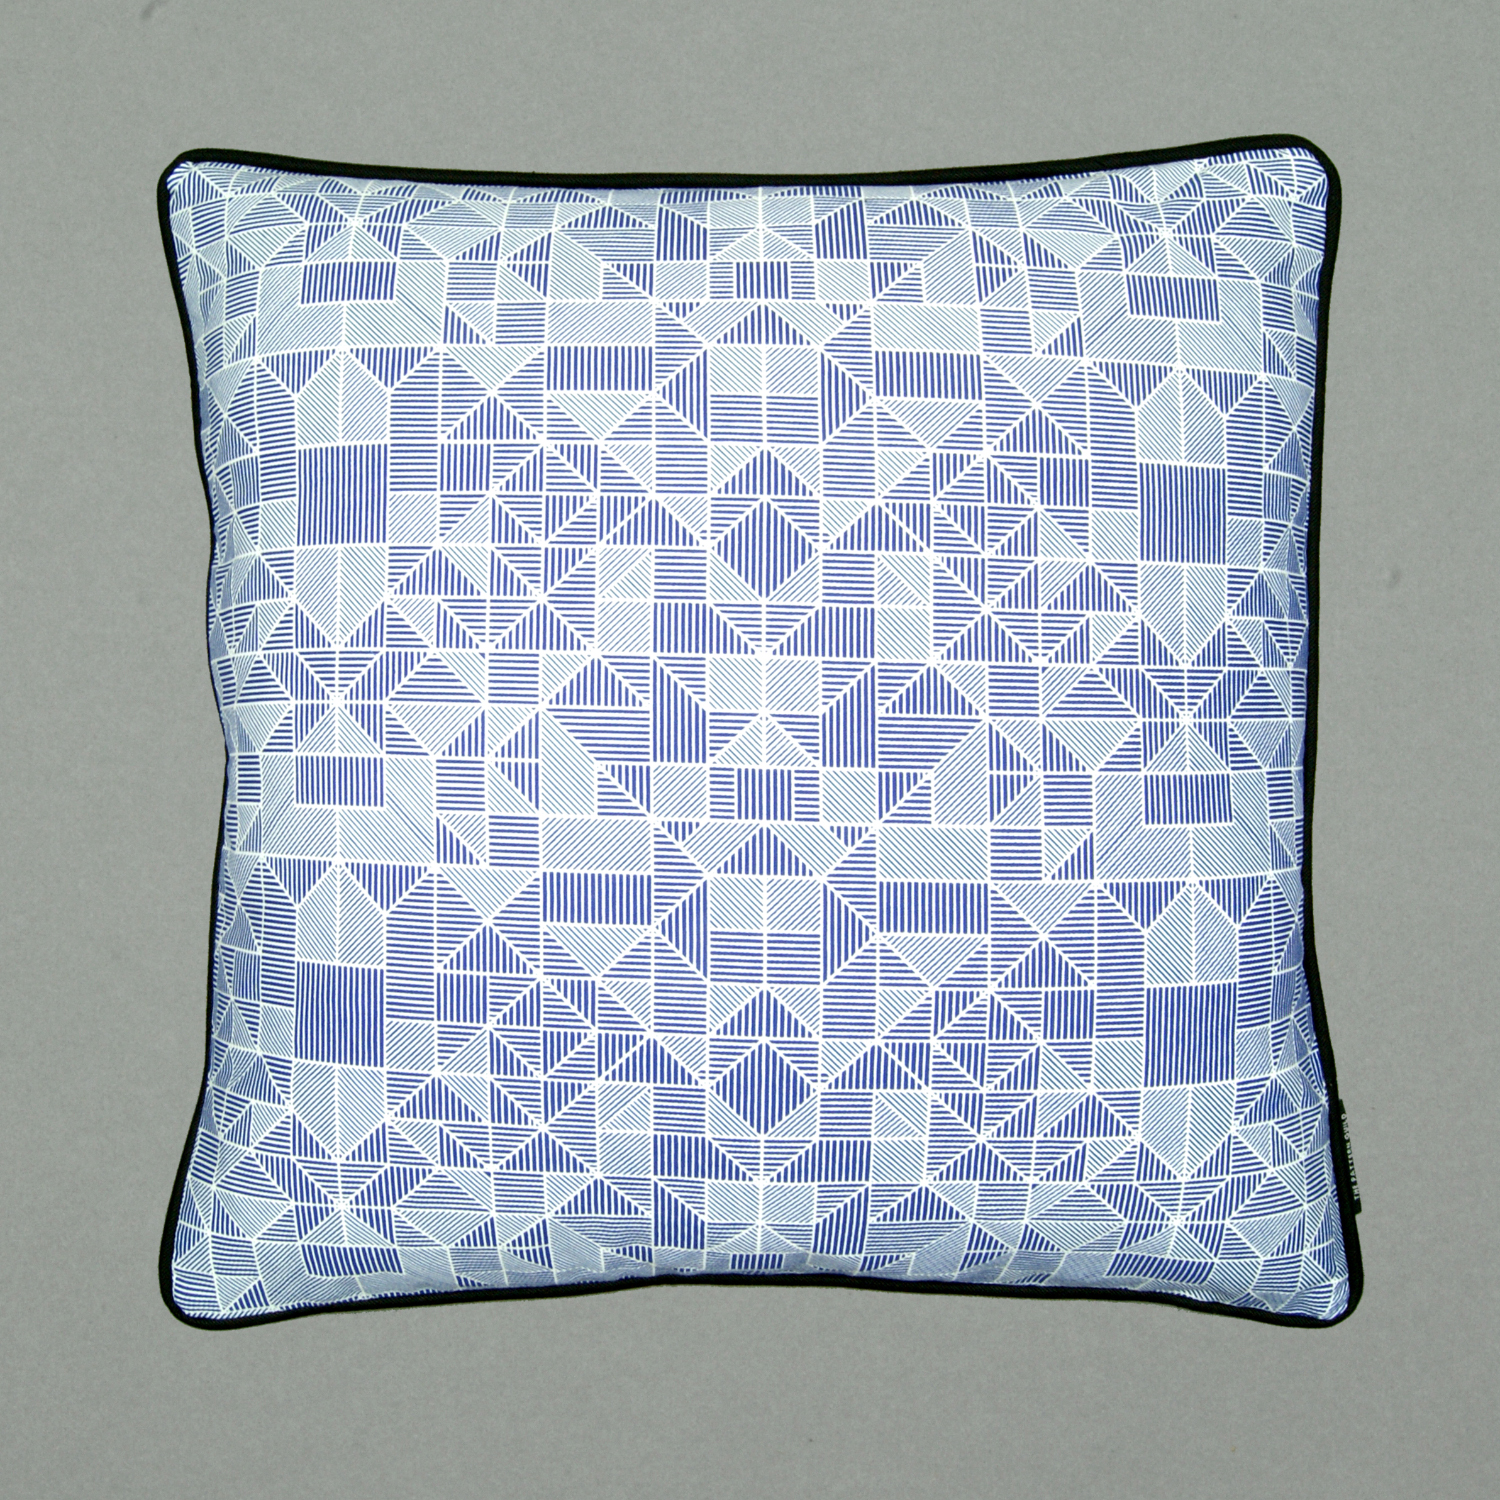 thepatternguild_home_cushion_lines1.jpg